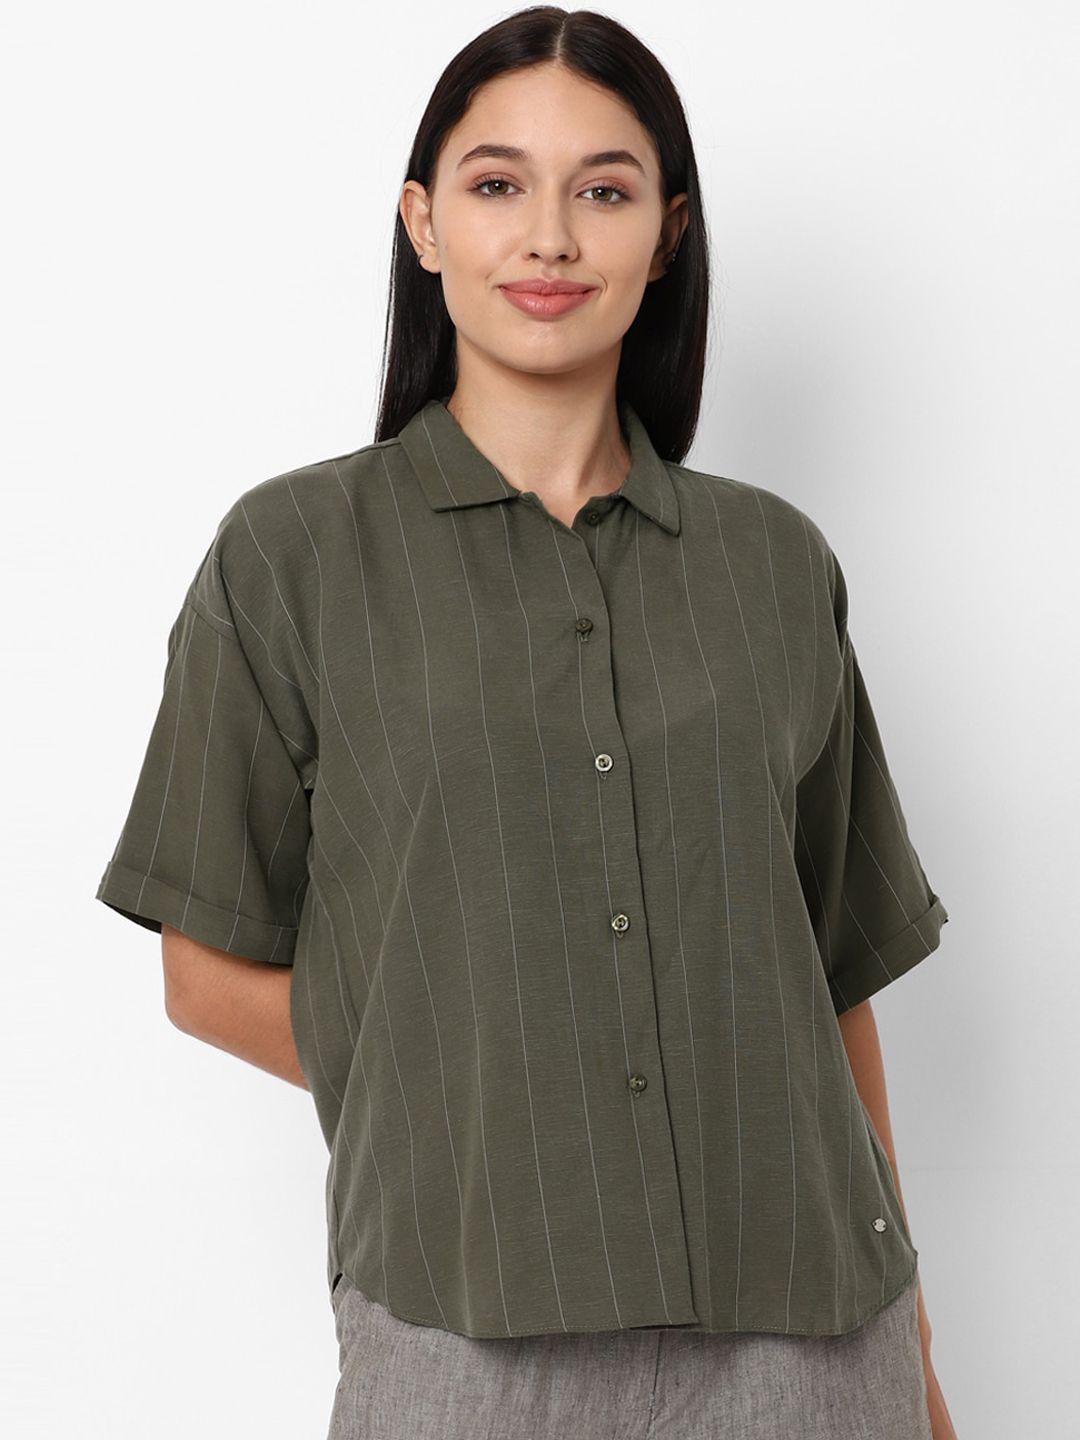 allen-solly-woman-women-olive-green-opaque-striped-casual-shirt